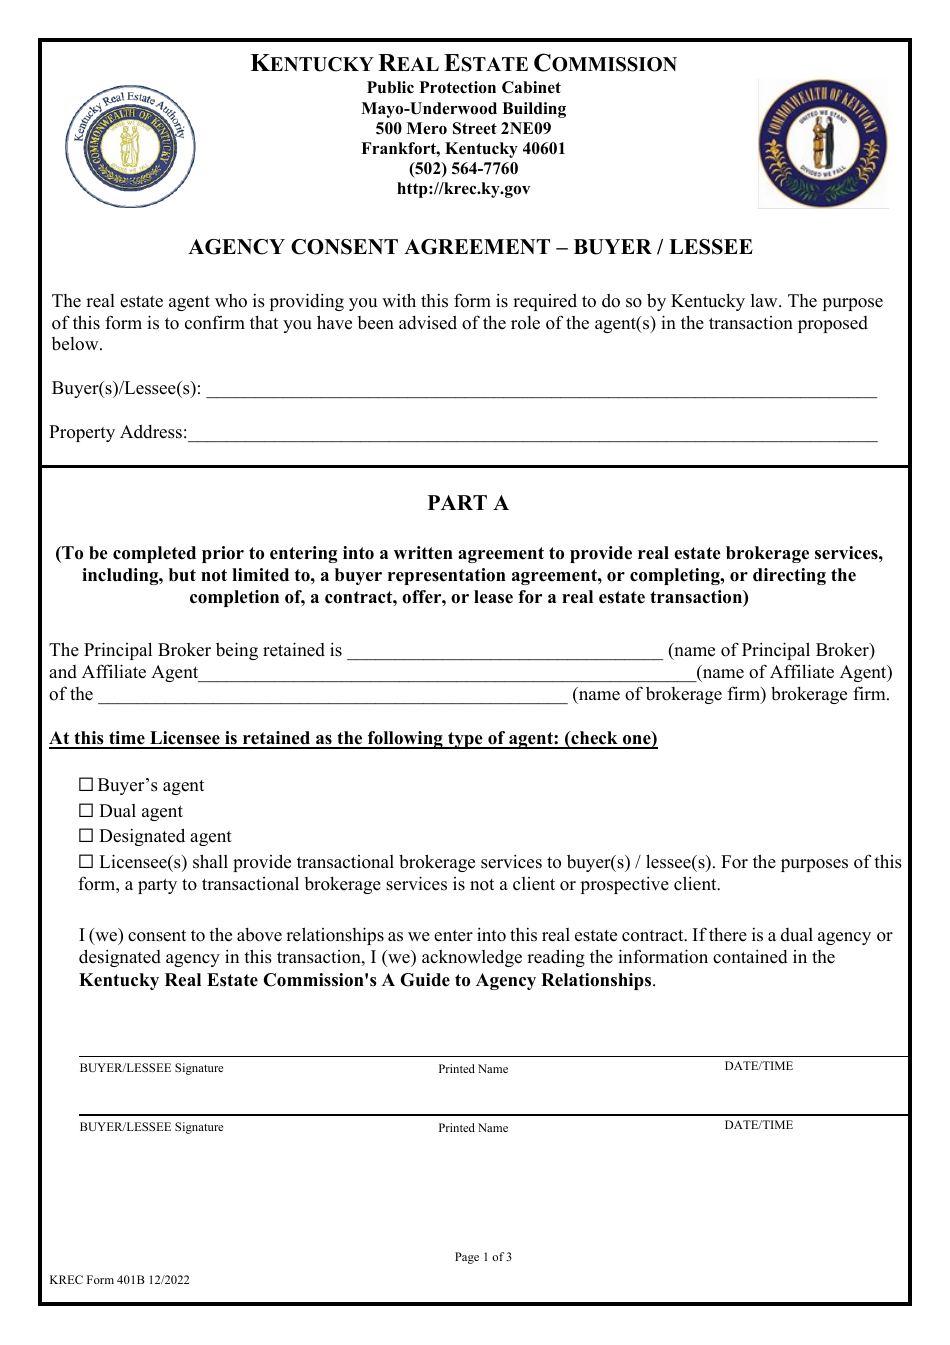 KREC Form 401B Agency Consent Agreement - Buyer / Lessee - Kentucky, Page 1